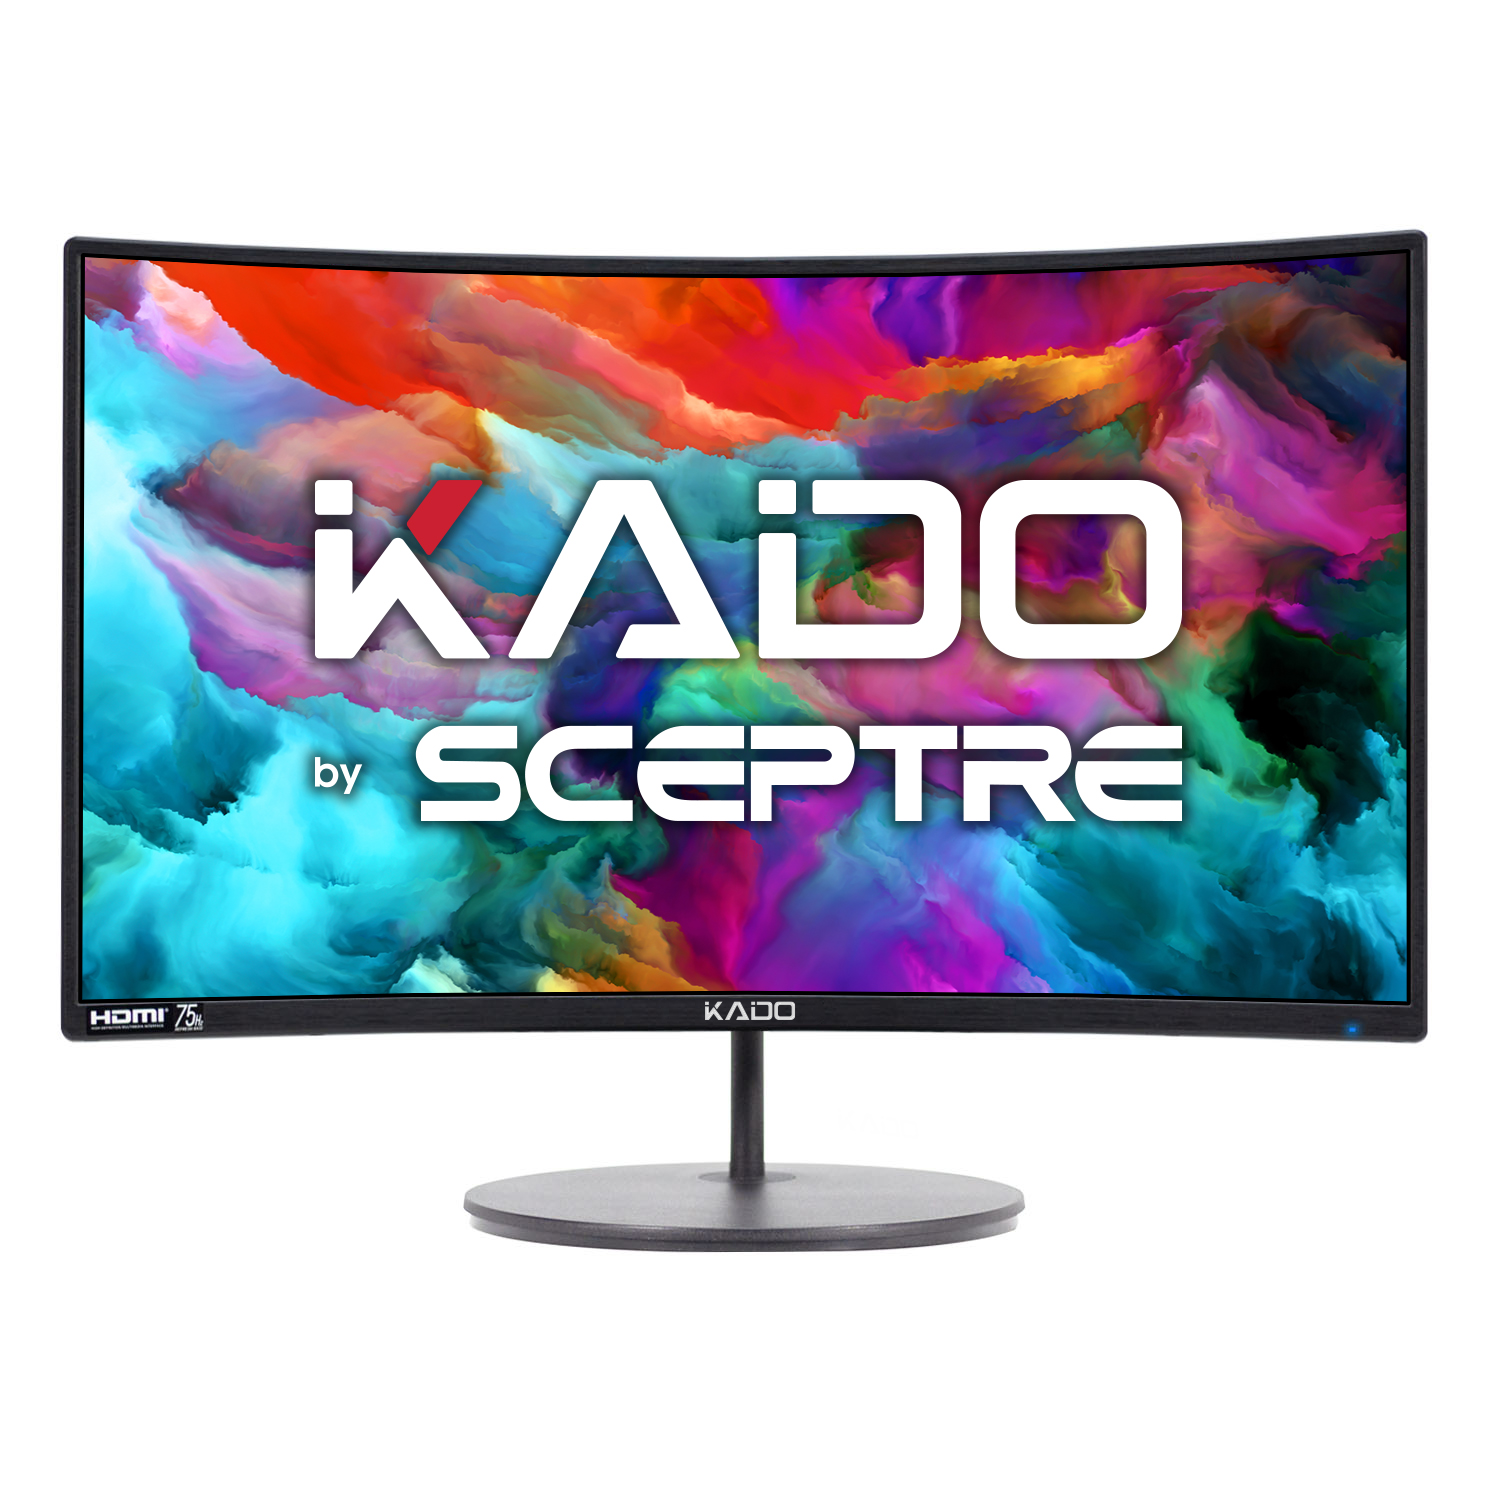 

Kado By Sceptre Curved 24" Computer Monitor 1500r 1920x1080 75hz Gaming Office Vga Built-in Speakers Wall Mount Ready Black